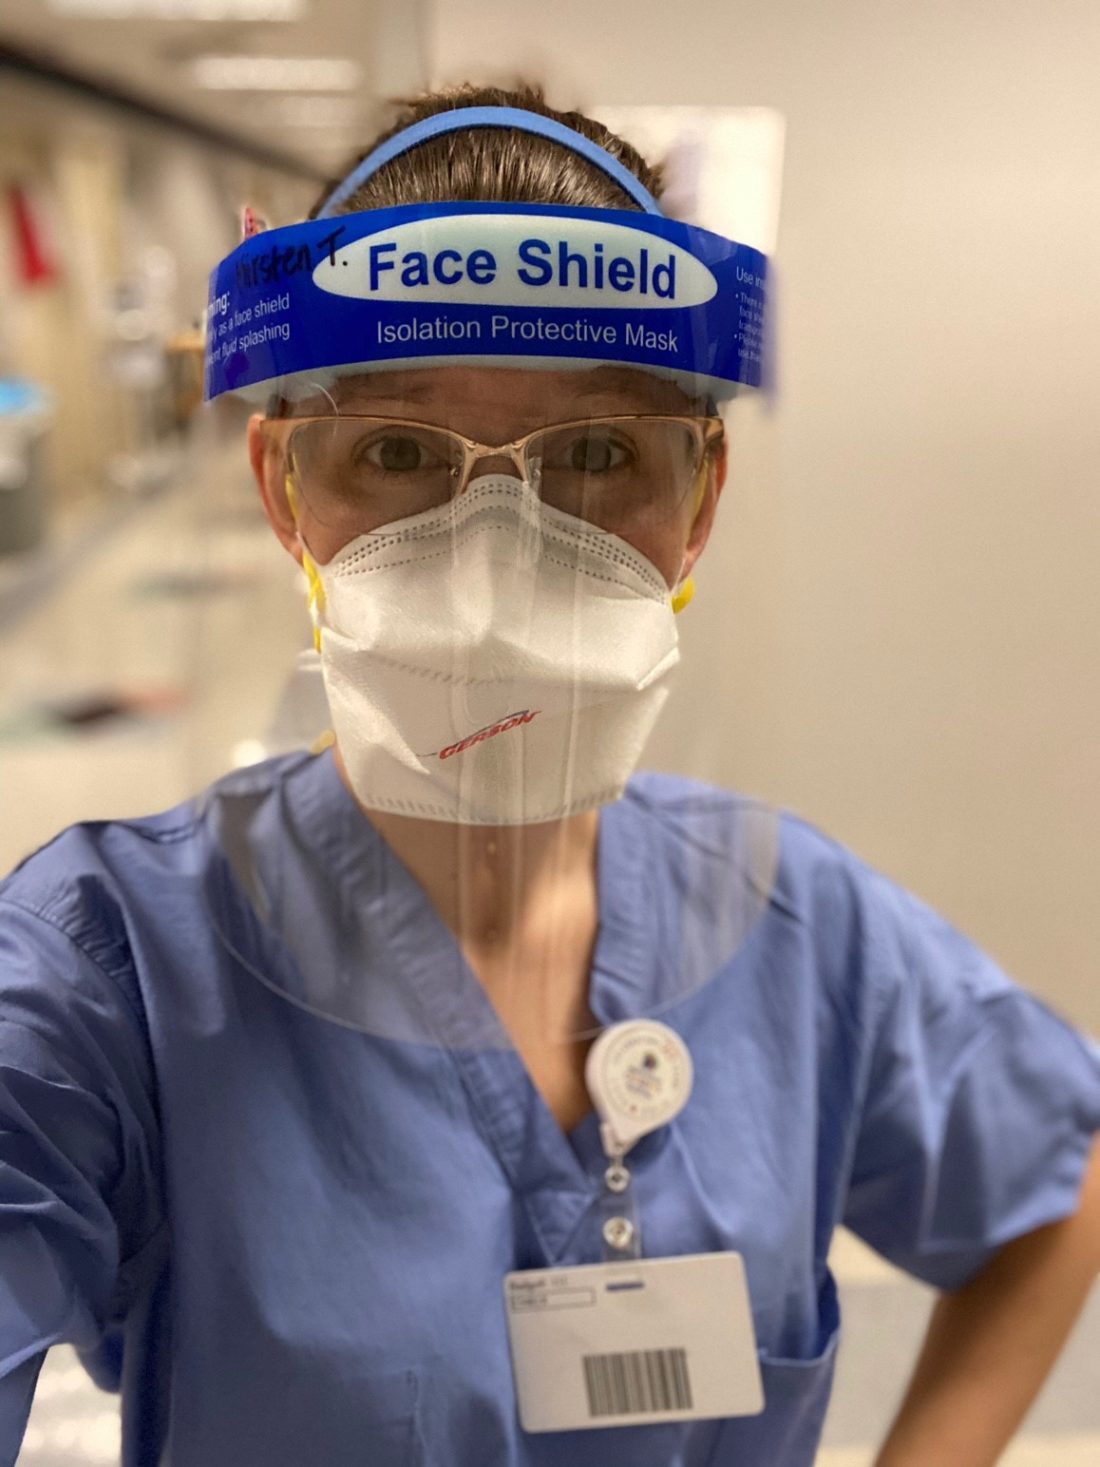 Female nurse wearing blue scrubs, a face mask and face shield 